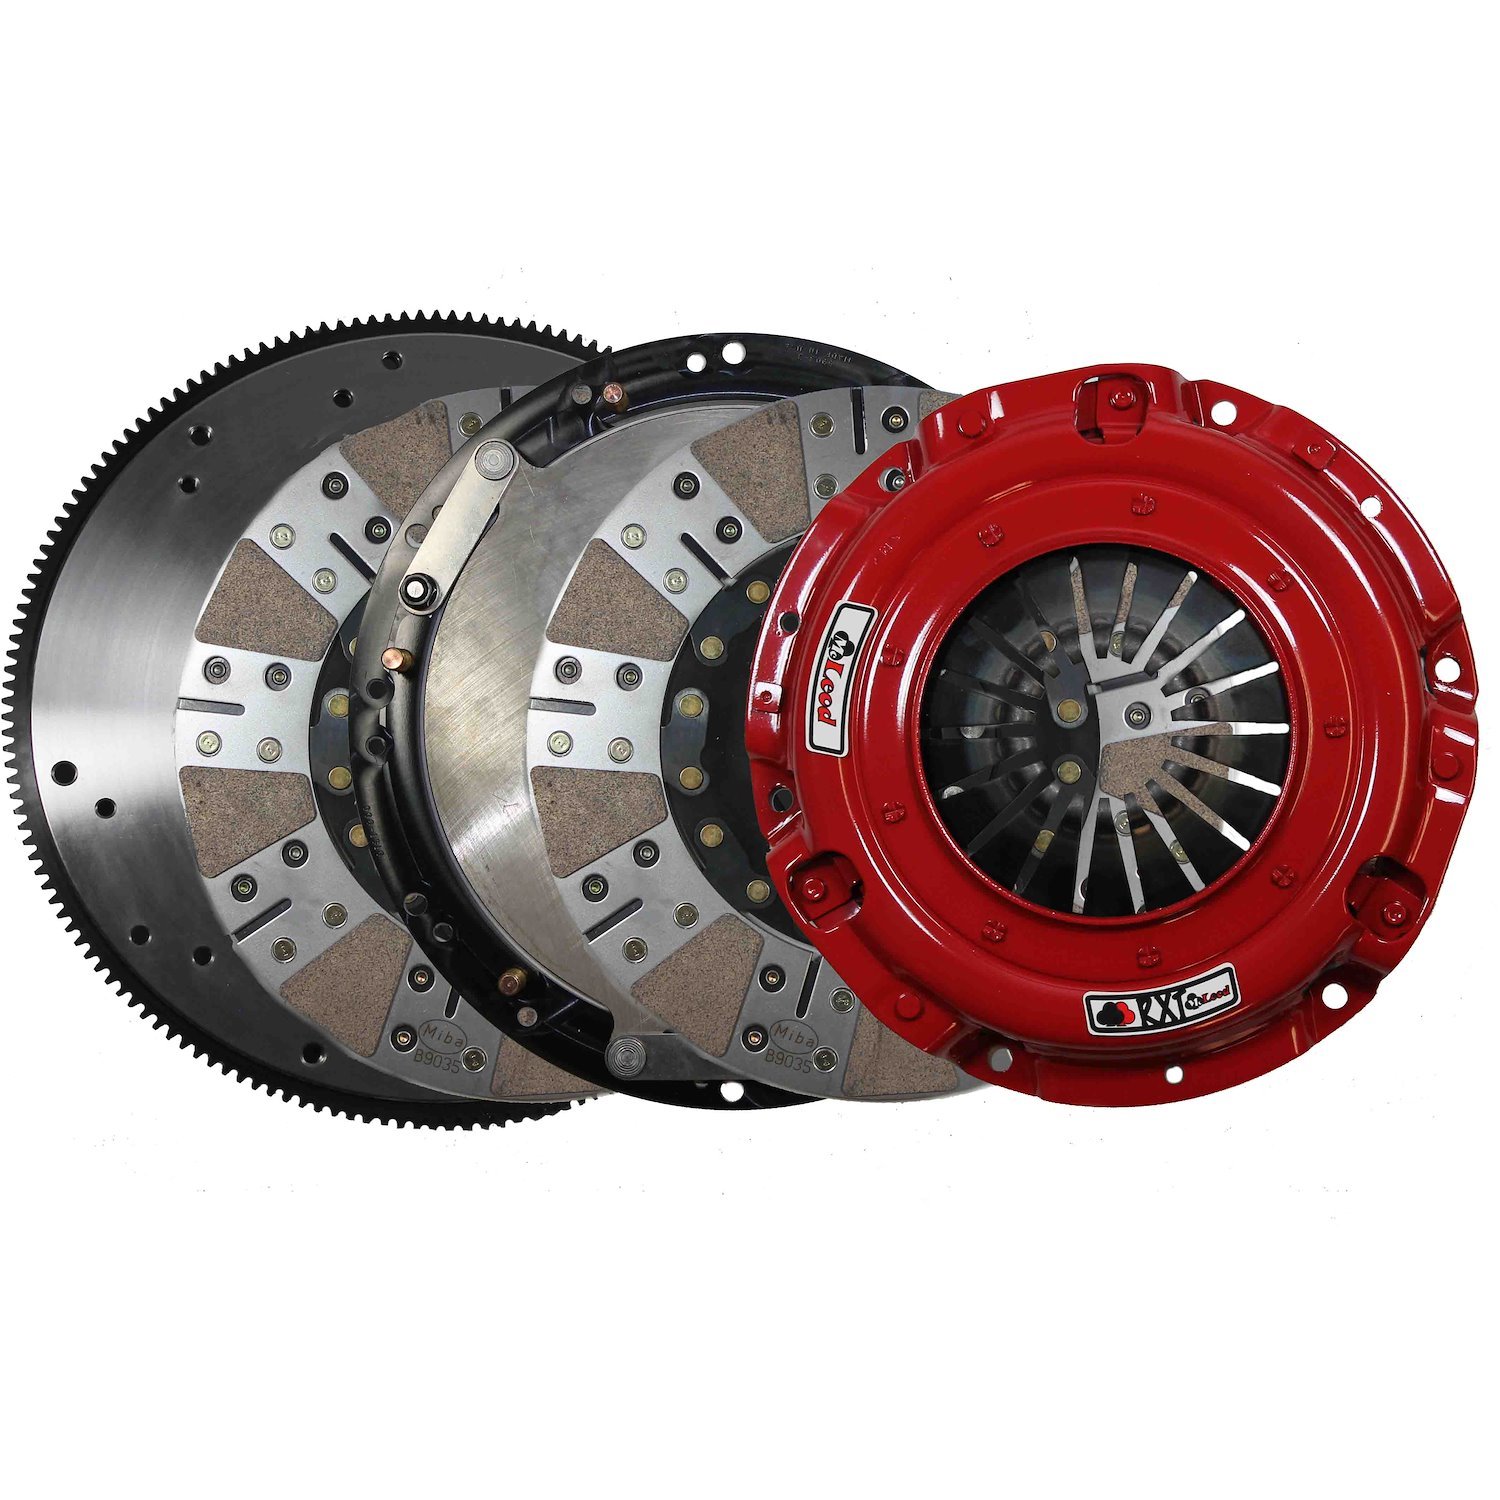 Power Pack RST Twin Disc Clutch Kit [1996-2010 Ford 4.6L, 5.4L V8]